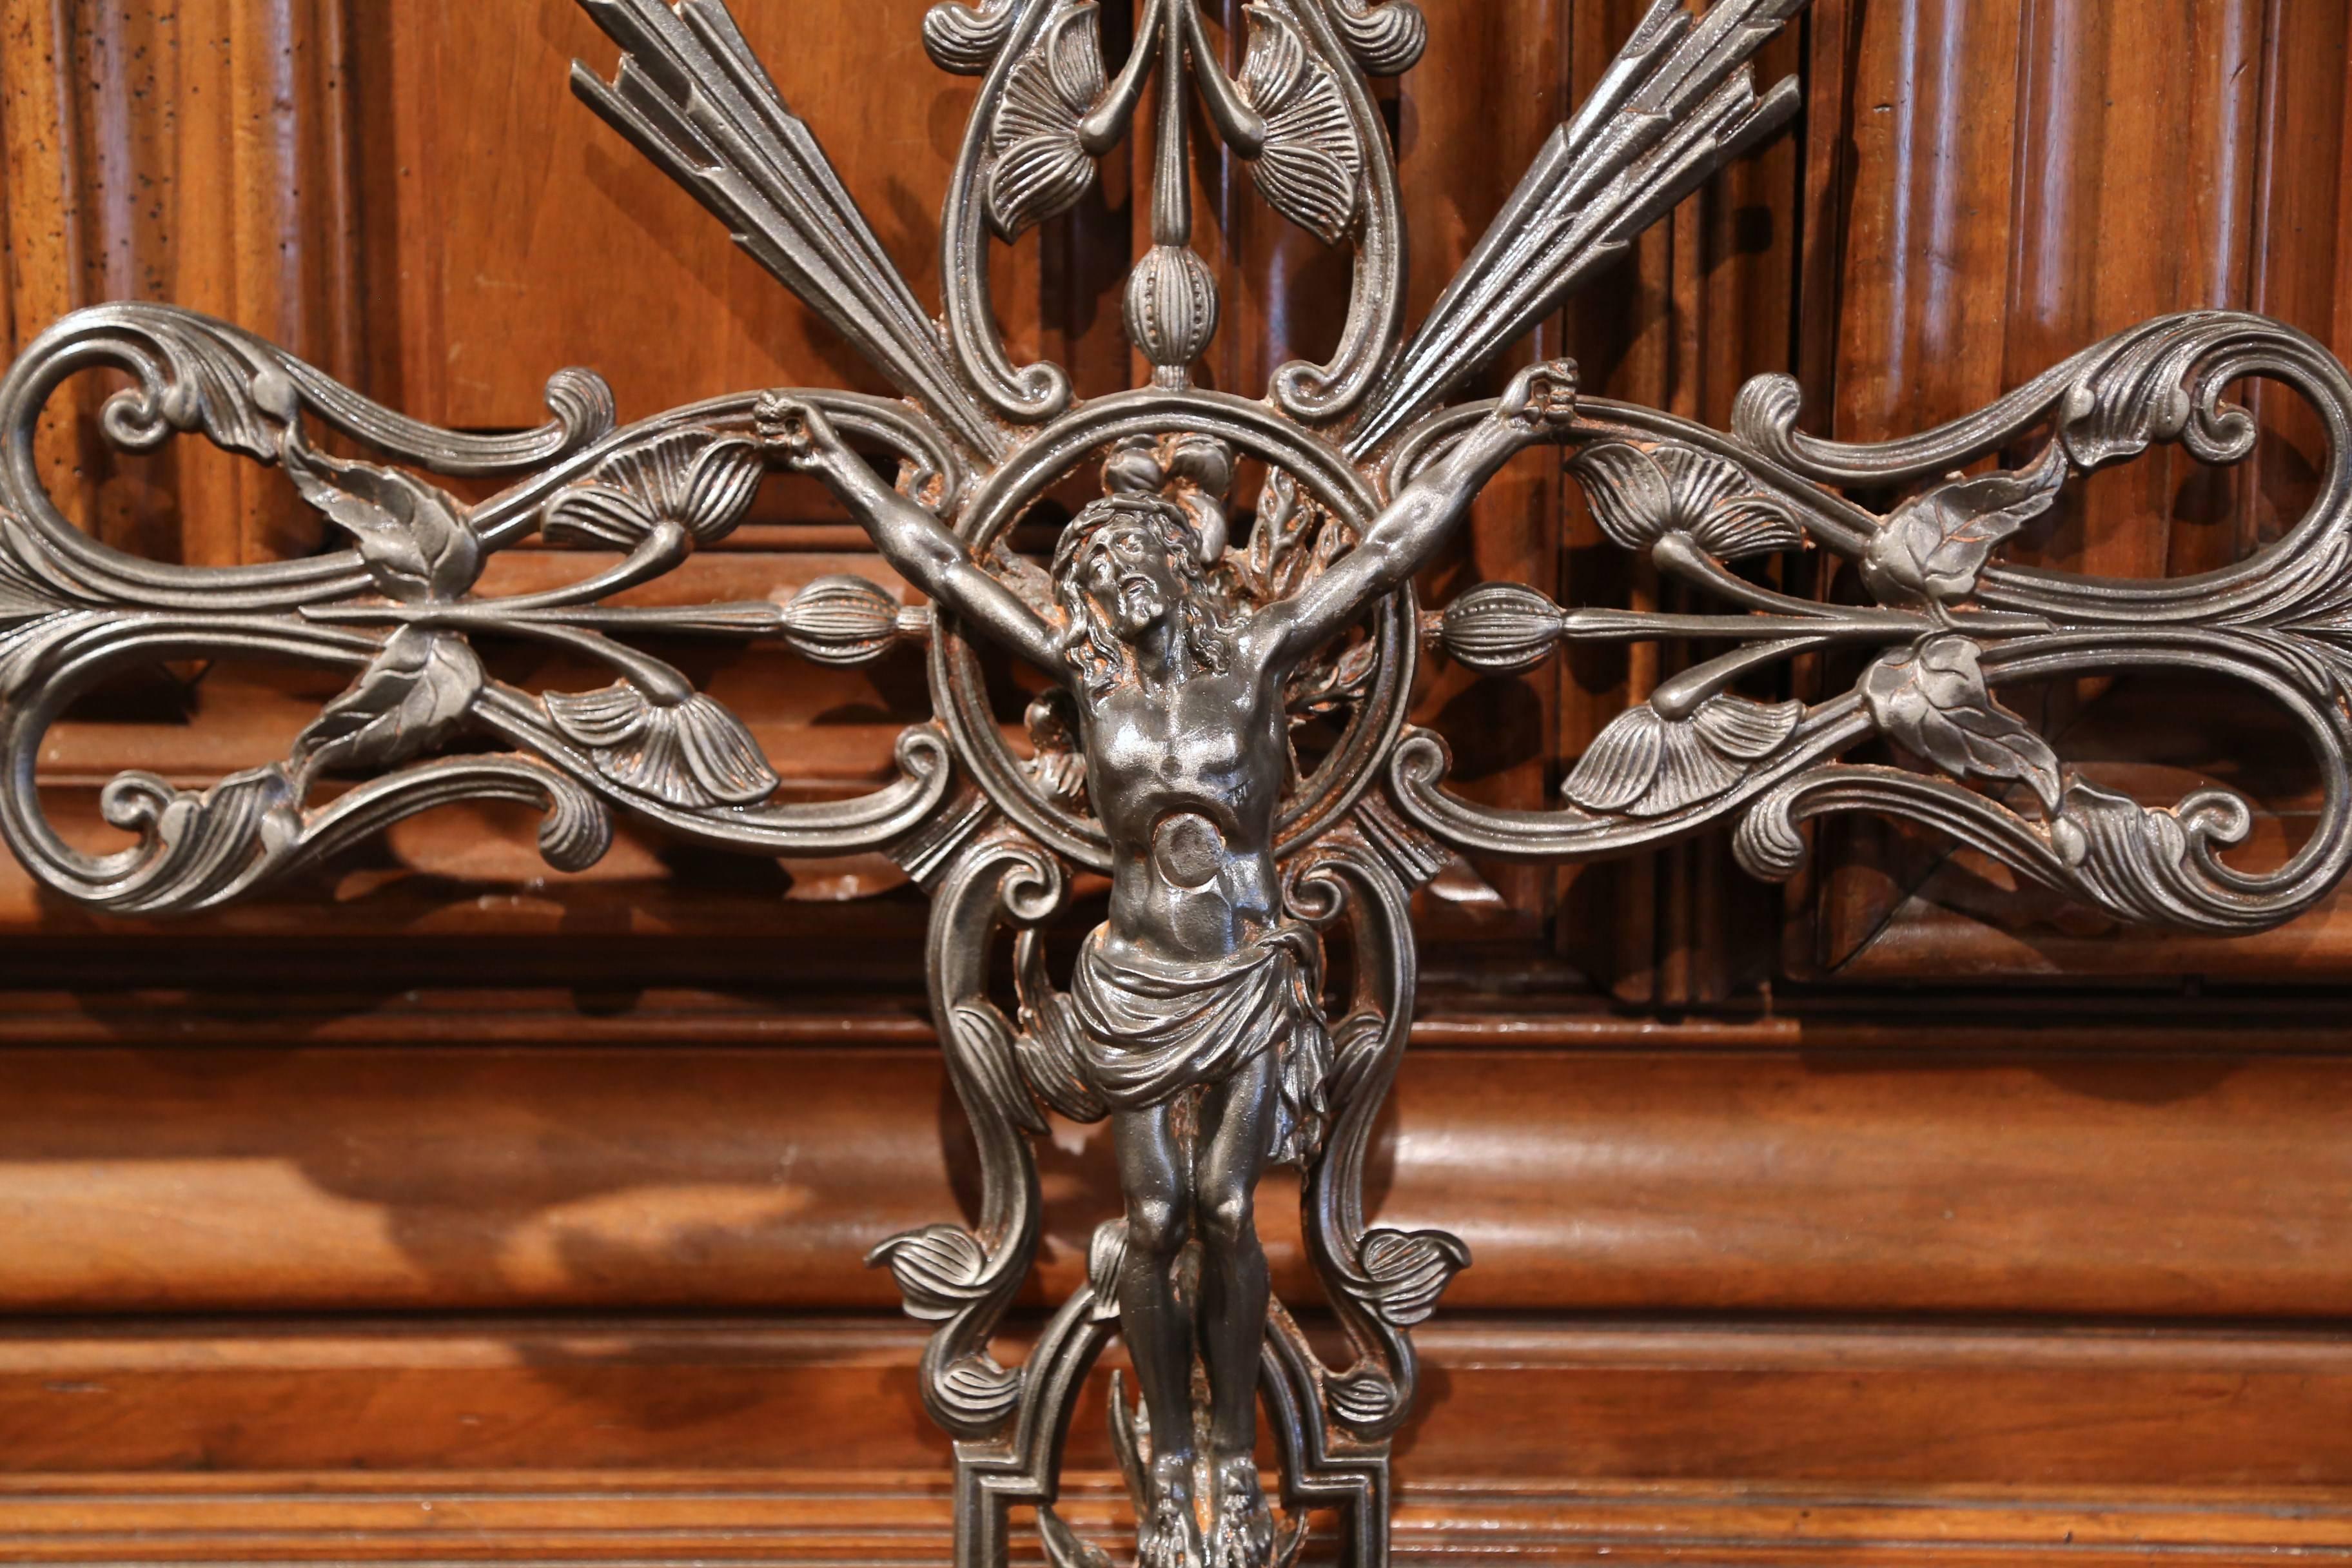 This beautiful, antique crucifix was crafted in France, circa 1860. The large iron piece features our Lord Jesus Christ nailed to the cross embellished with flowers and leaves. The classic crucifix sculpture has its original polished patinated